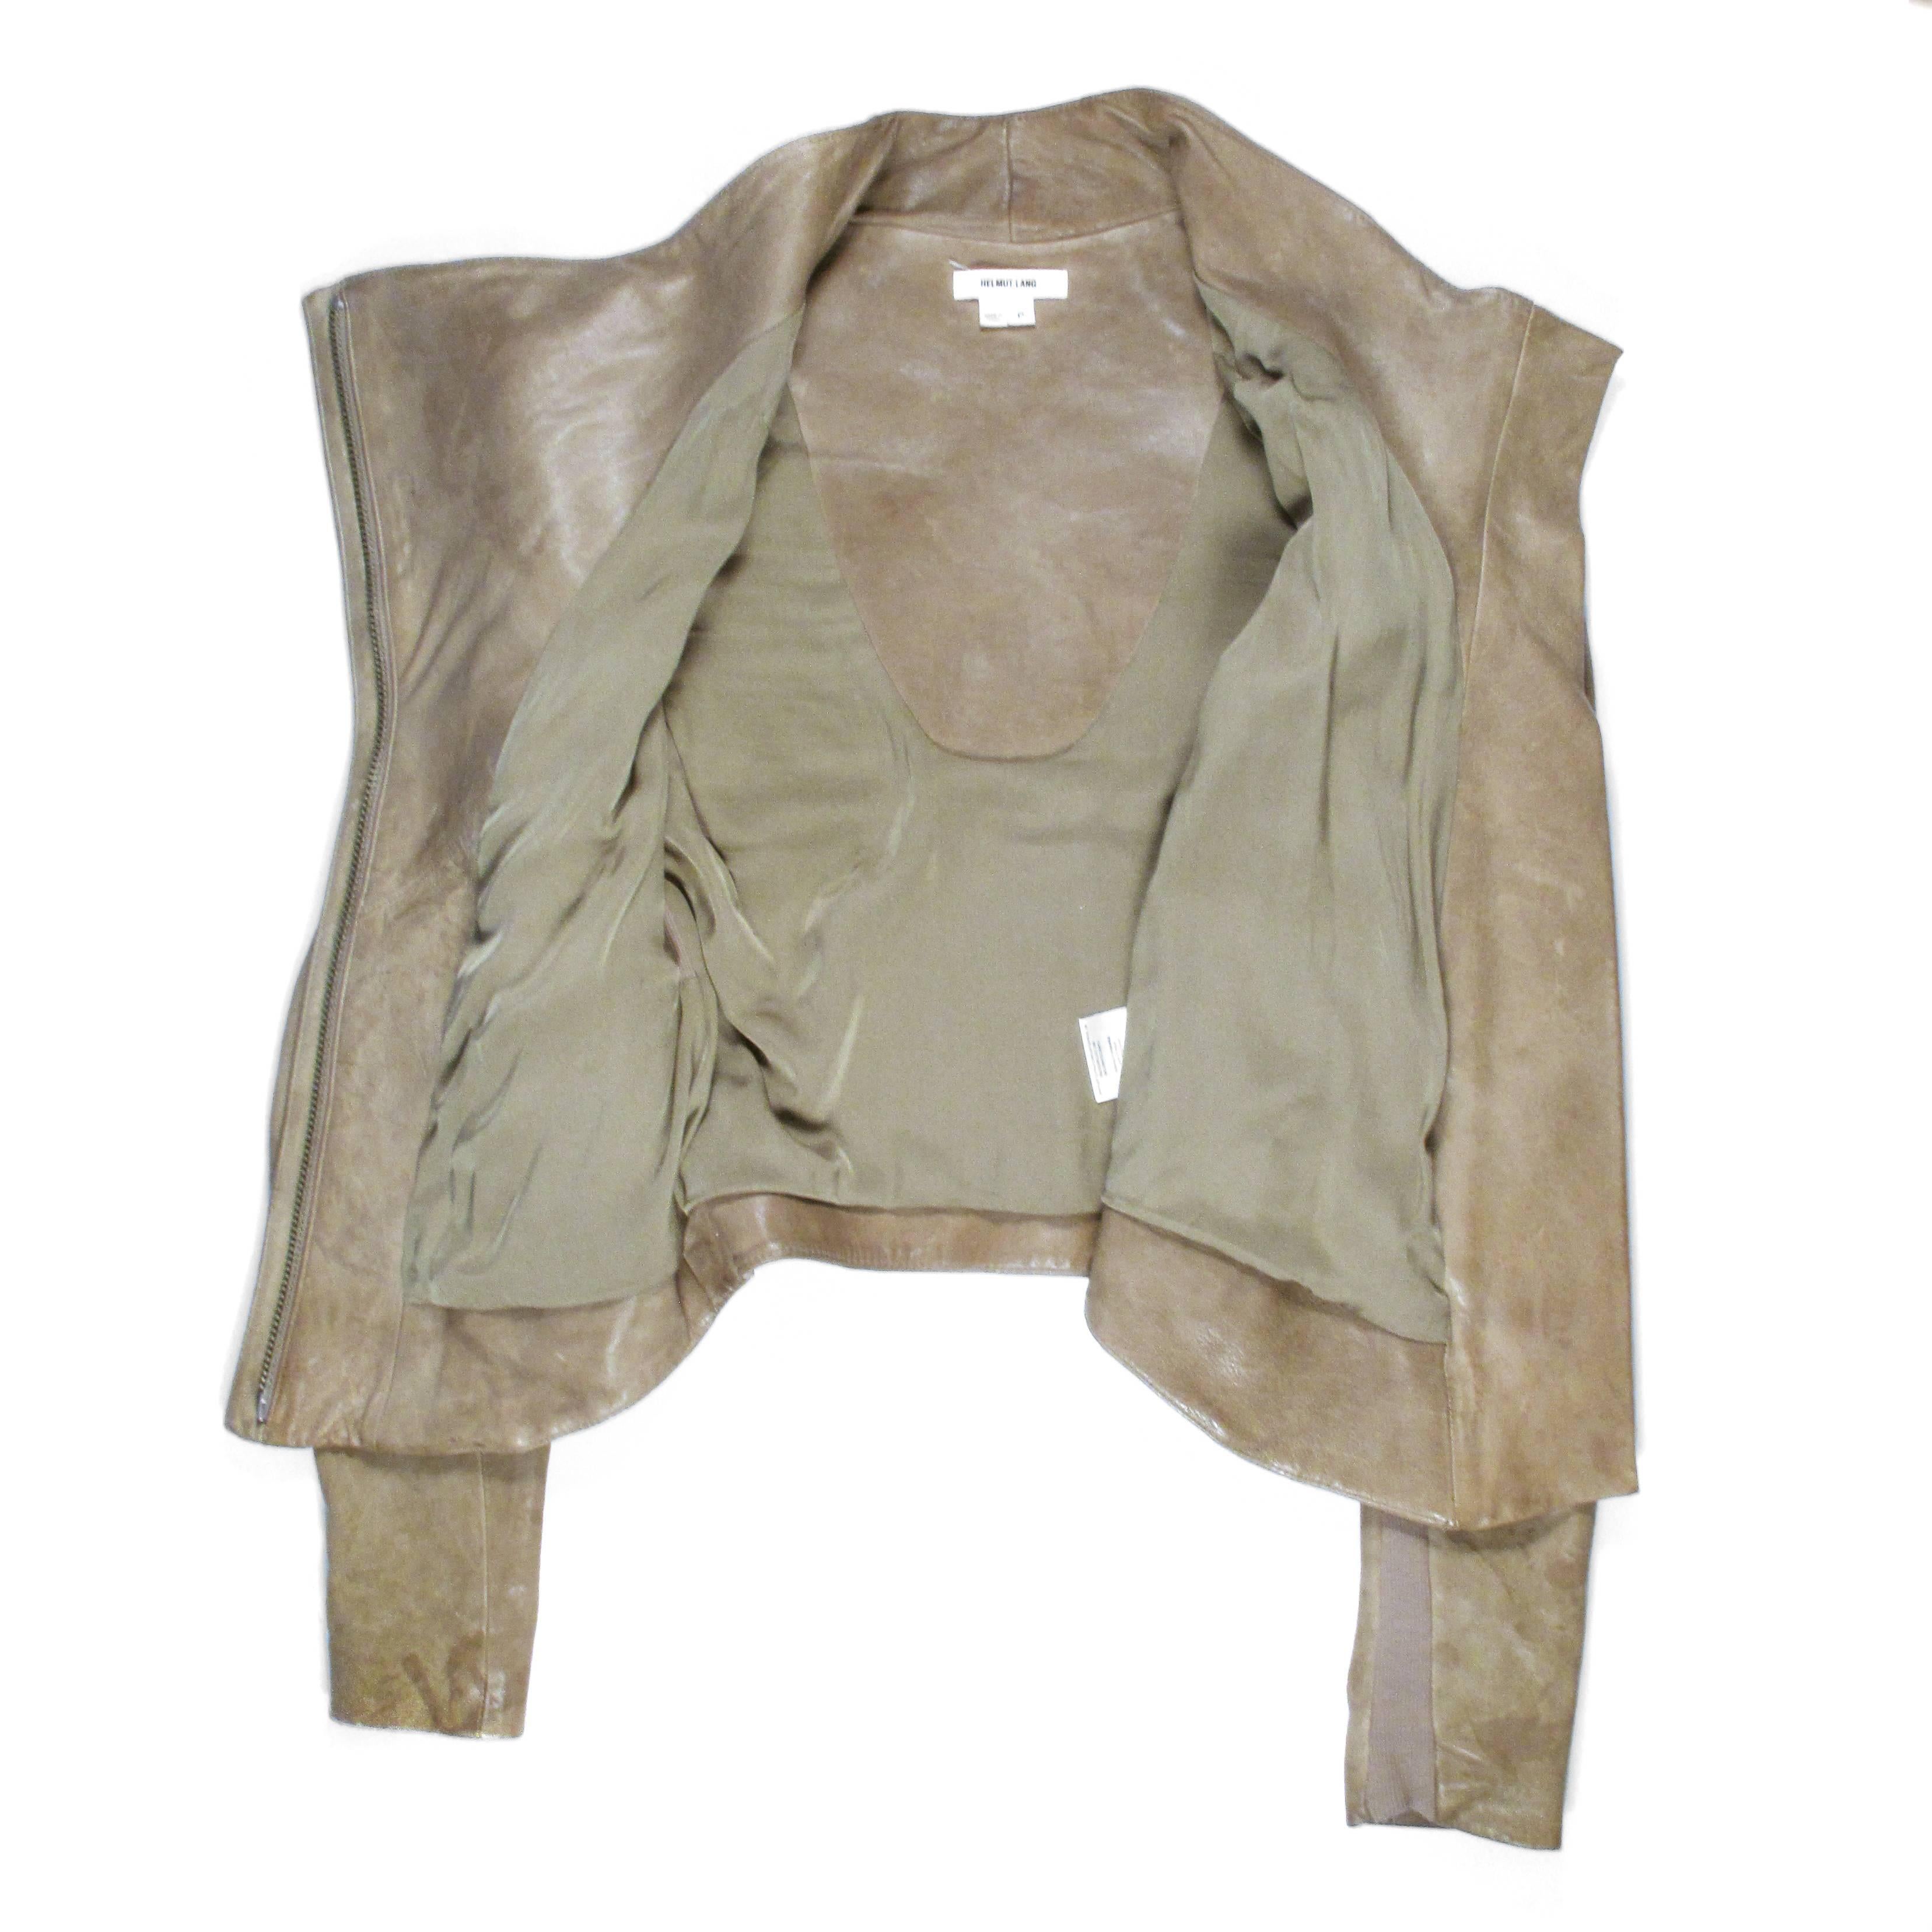 Helmut Lang - Leather Jacket

Retail: $1500.00

Size:  Small

Color: Tan

Material:  Leather

------------------------------------------------------------

Details:

- hidden zip closure

- ribbed trim

- silver tone hardware

-